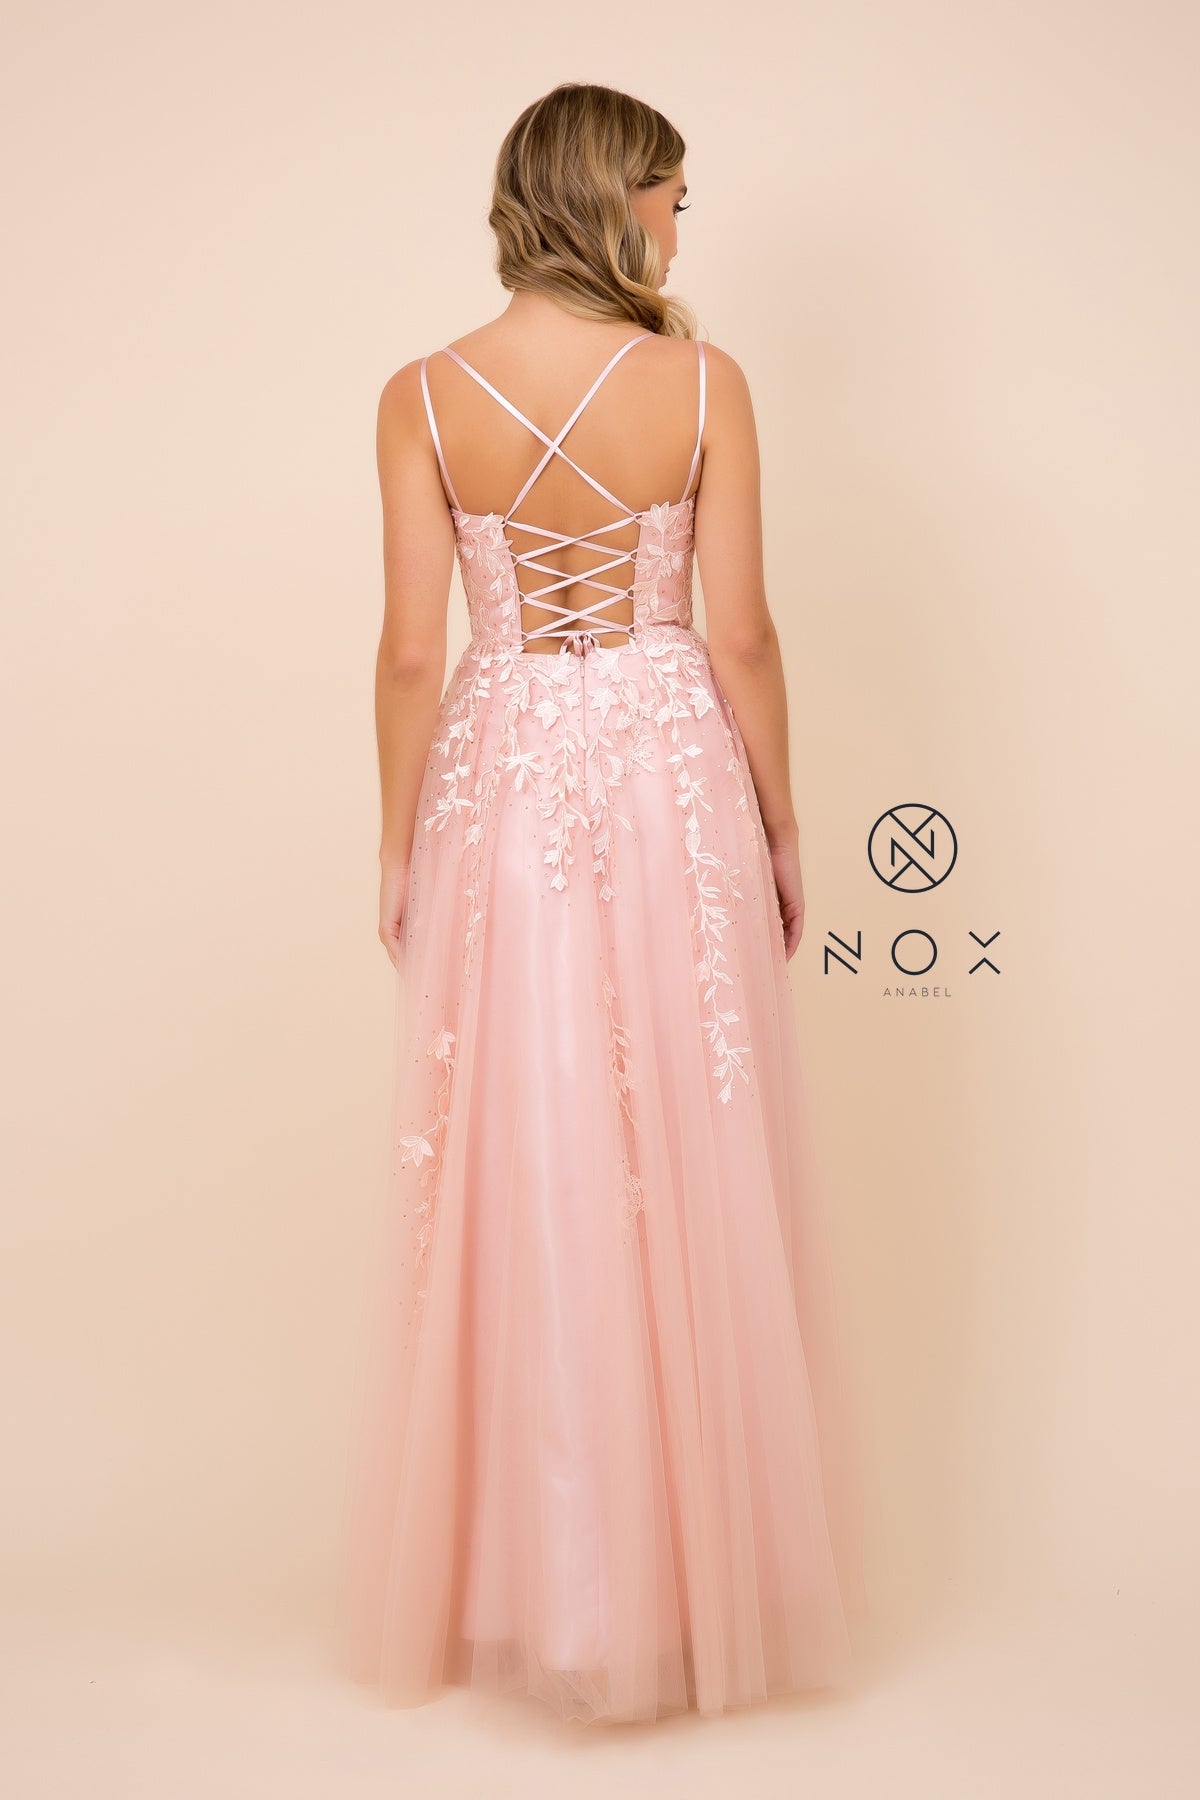 MyFashion.com - FLOOR-LENGTH DRESS WITH FLORAL DESIGN AND SPAGHETTI STRAPS (C415) - Nox Anabel promdress eveningdress fashion partydress weddingdress 
 gown homecoming promgown weddinggown 